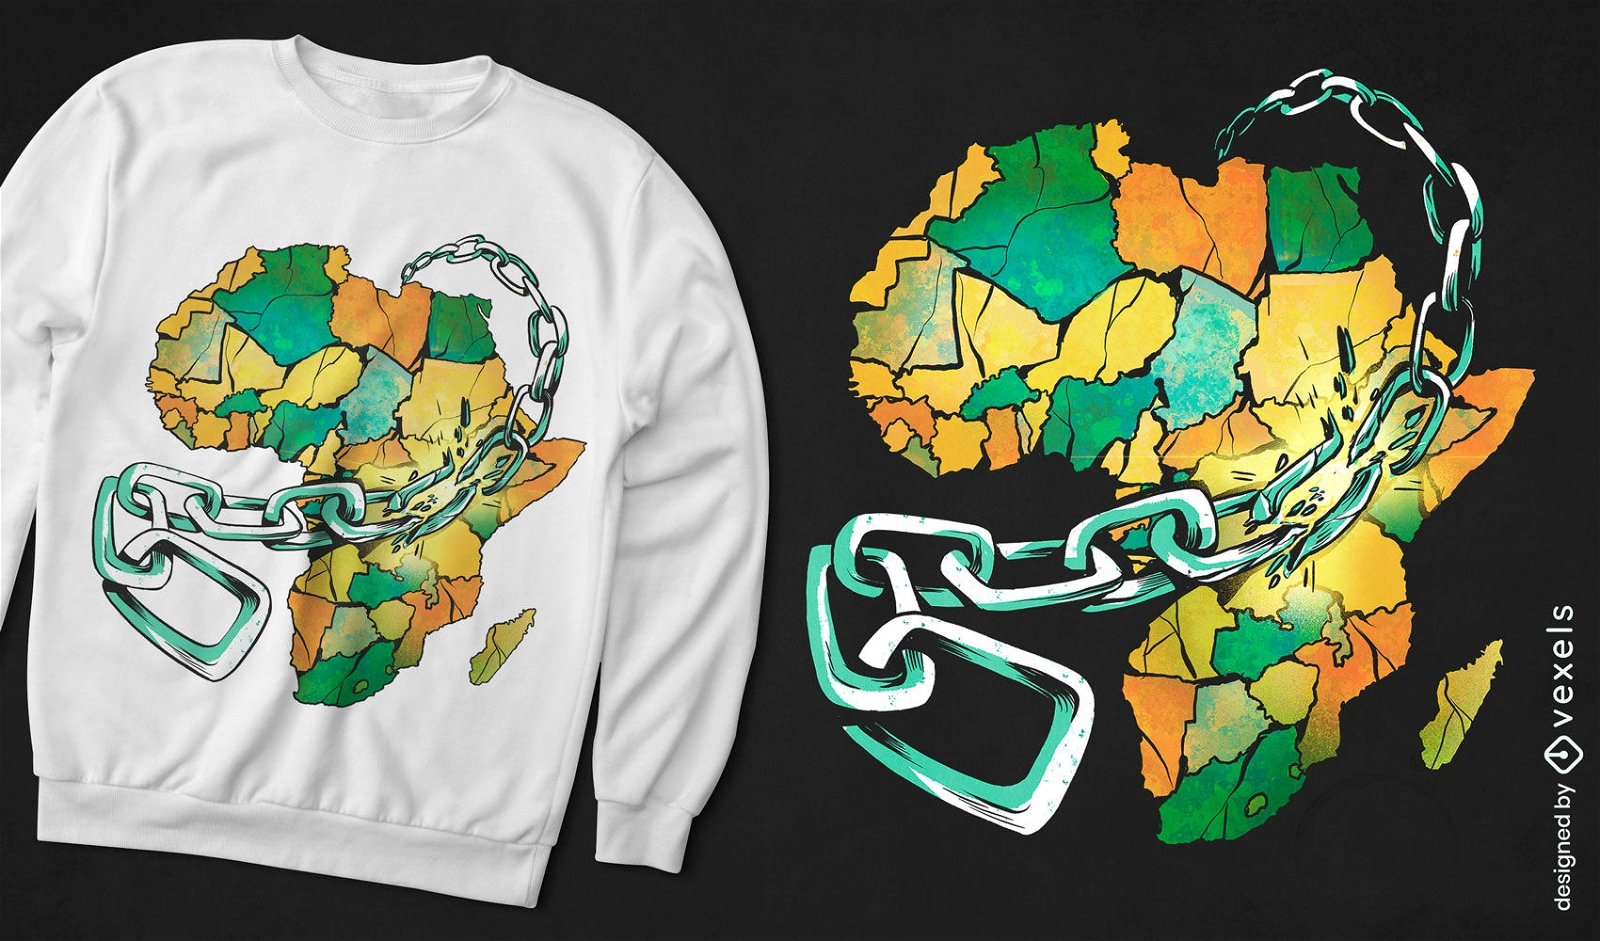 Africa map in chains t-shirt design